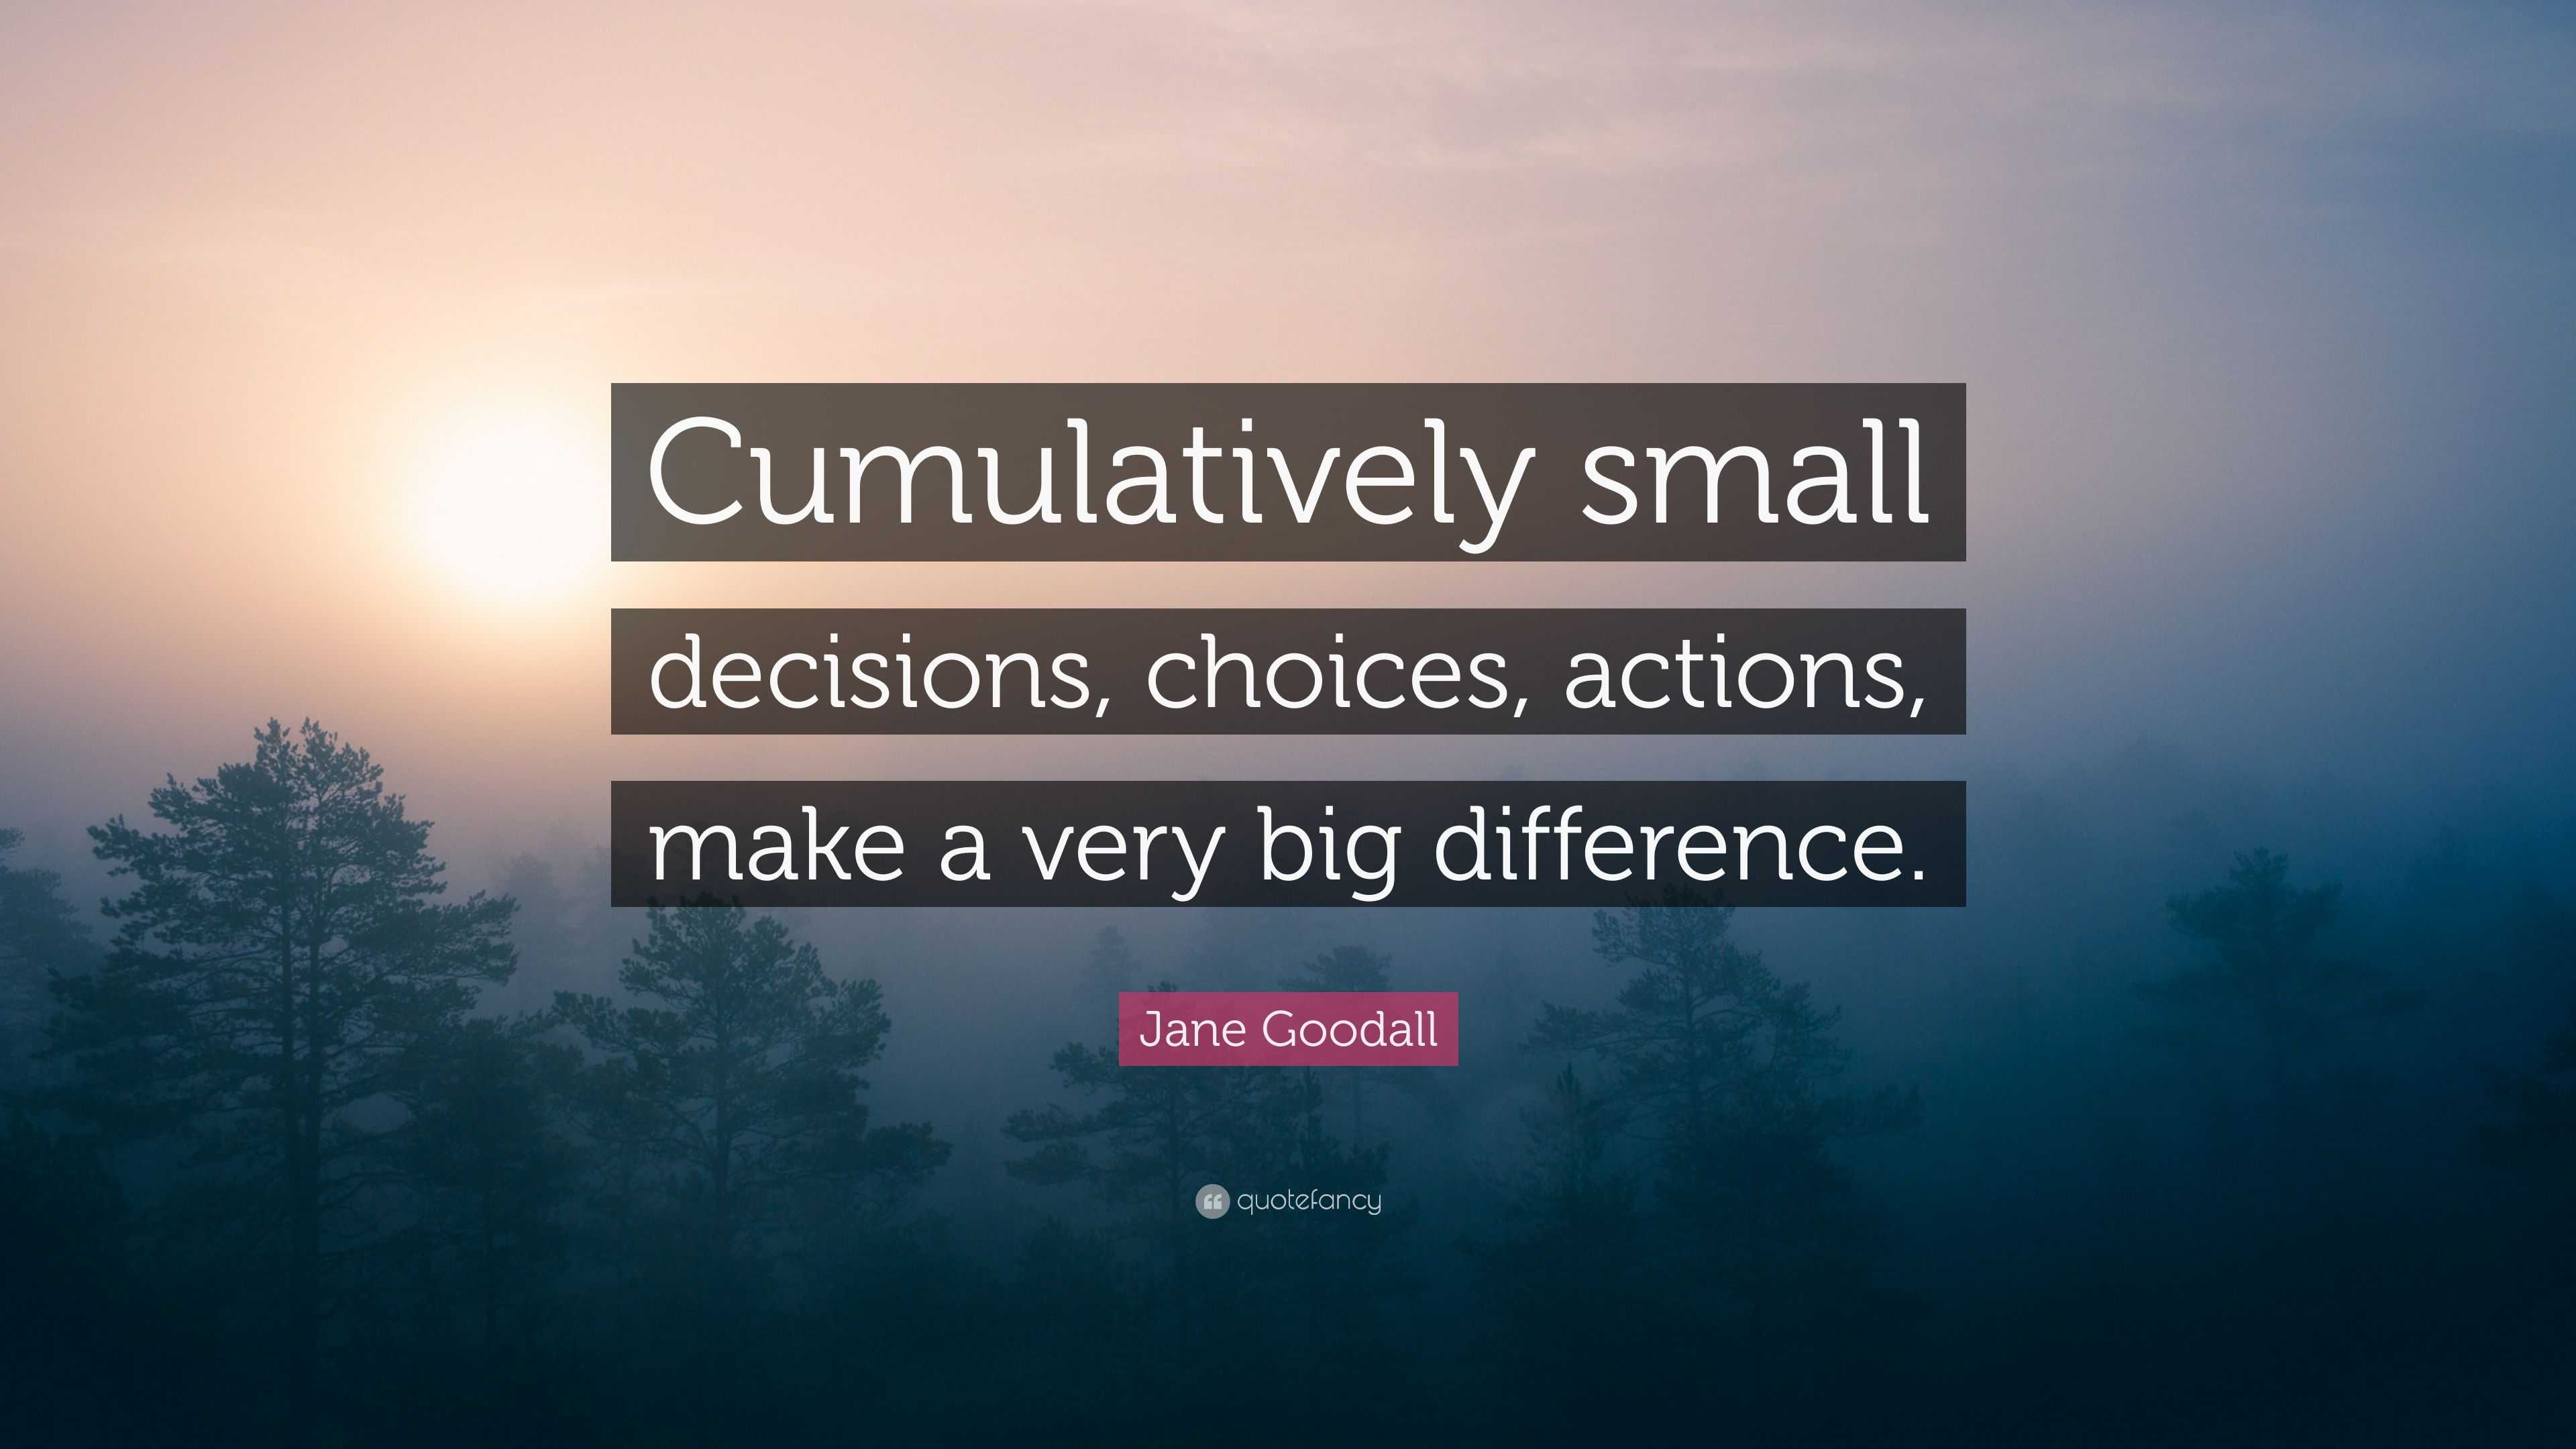 Jane Goodall Quote “Cumulatively small decisions, choices